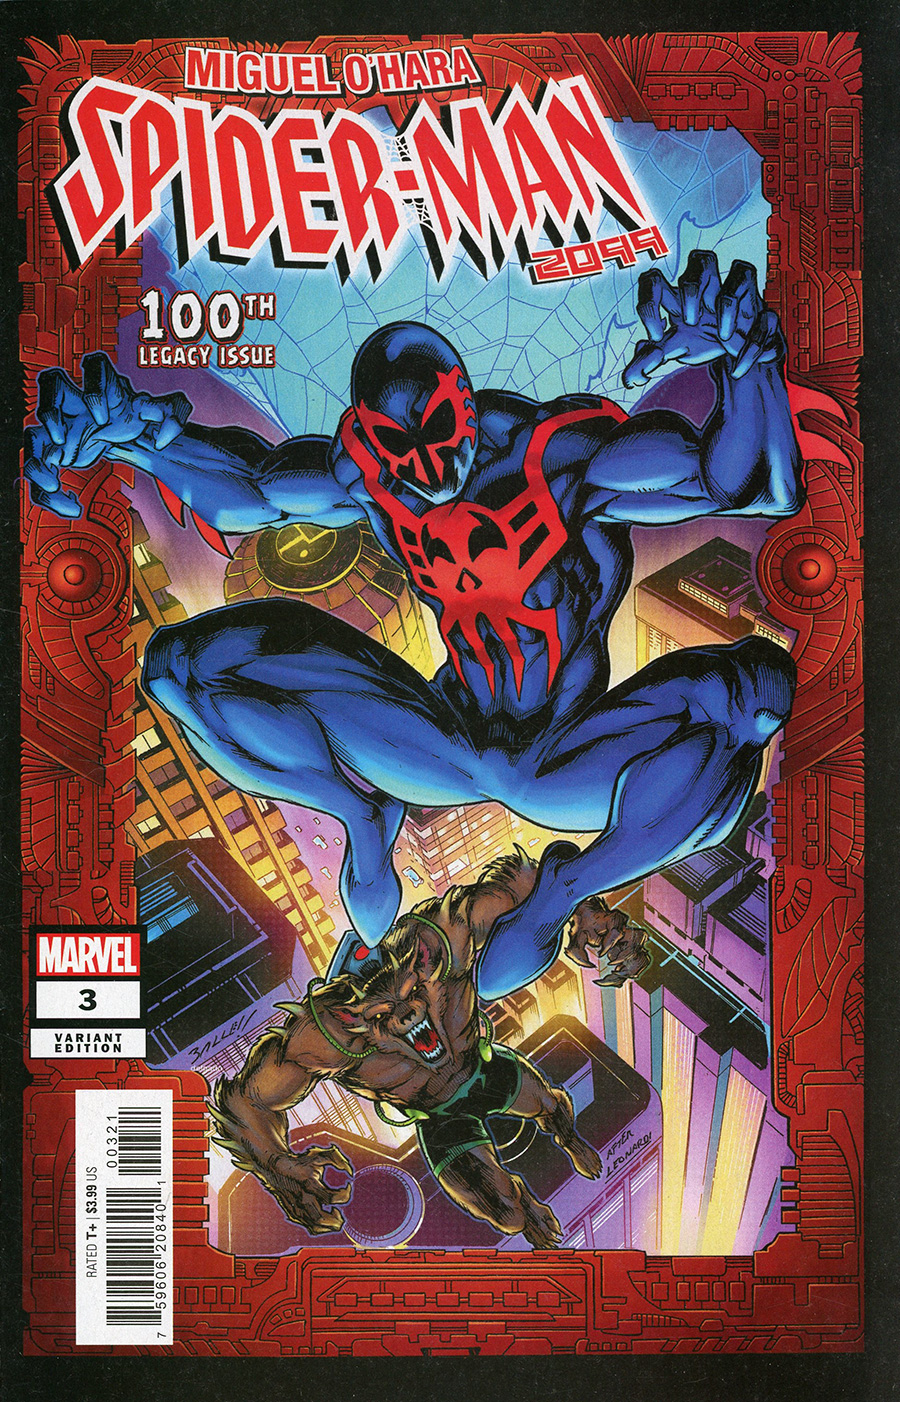 Miguel Ohara Spider-Man 2099 #3 Cover B Variant Mark Bagley Homage Cover